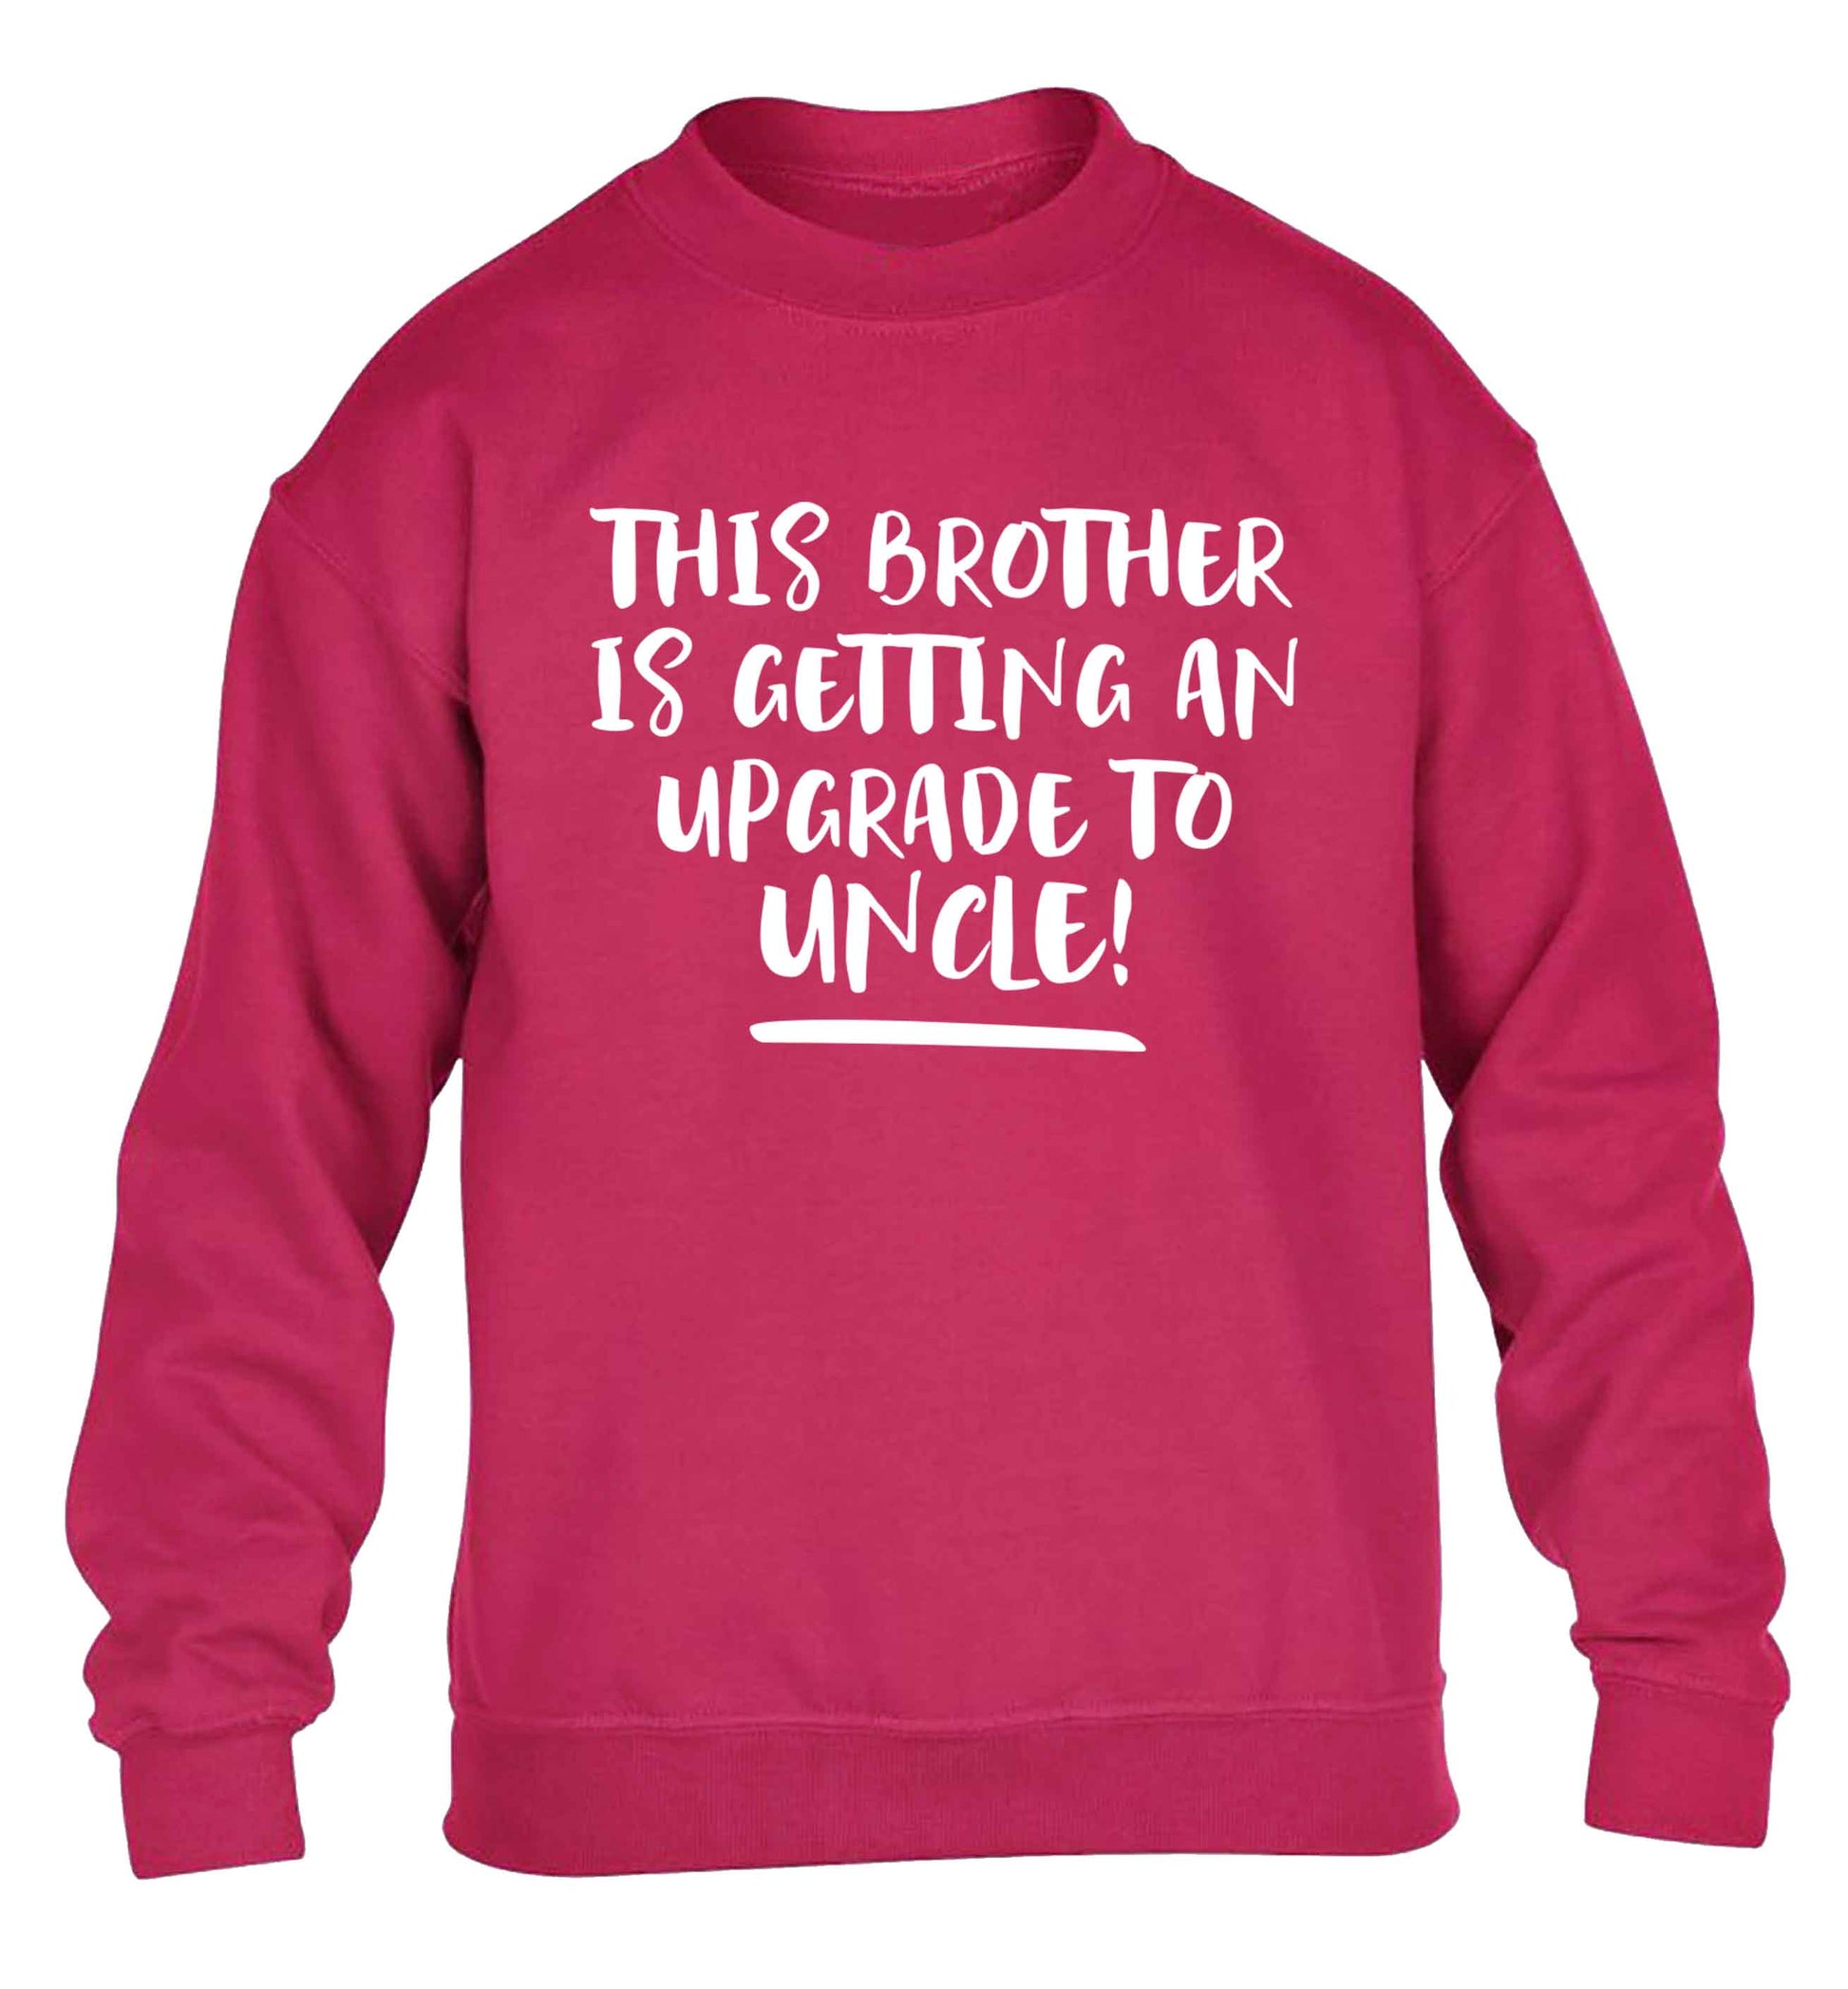 This brother is getting an upgrade to uncle! children's pink sweater 12-13 Years